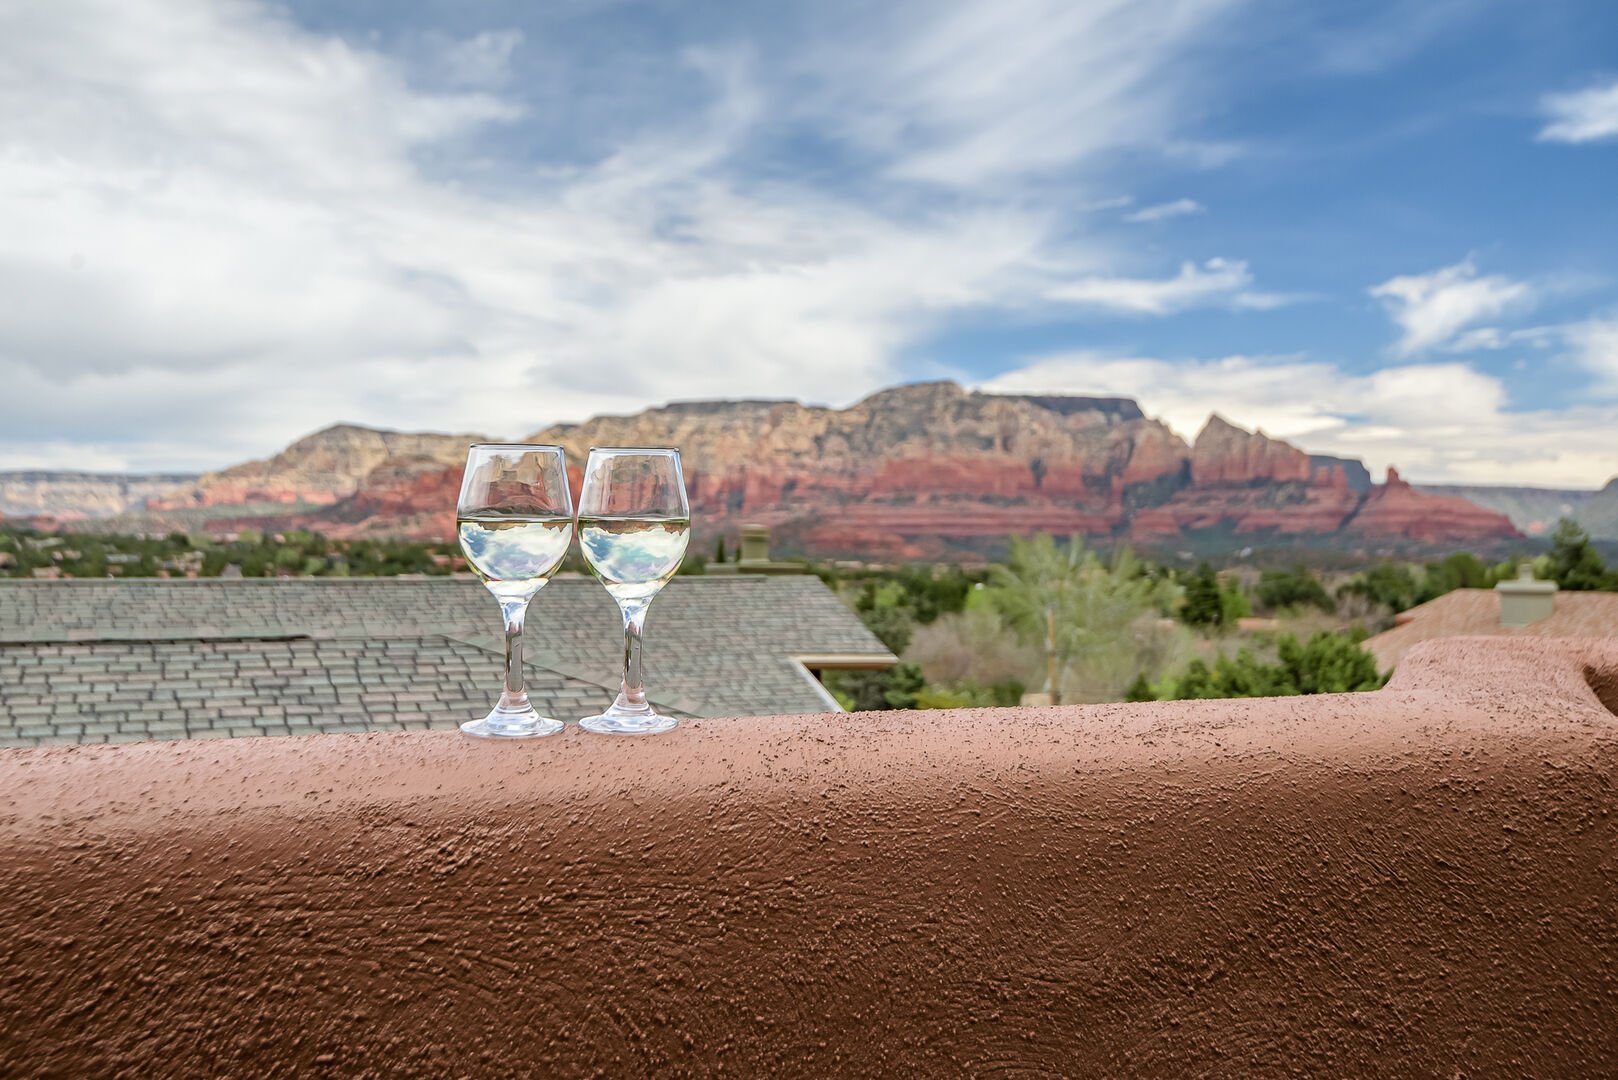 Enjoy a Drink and the Surrounding Views!